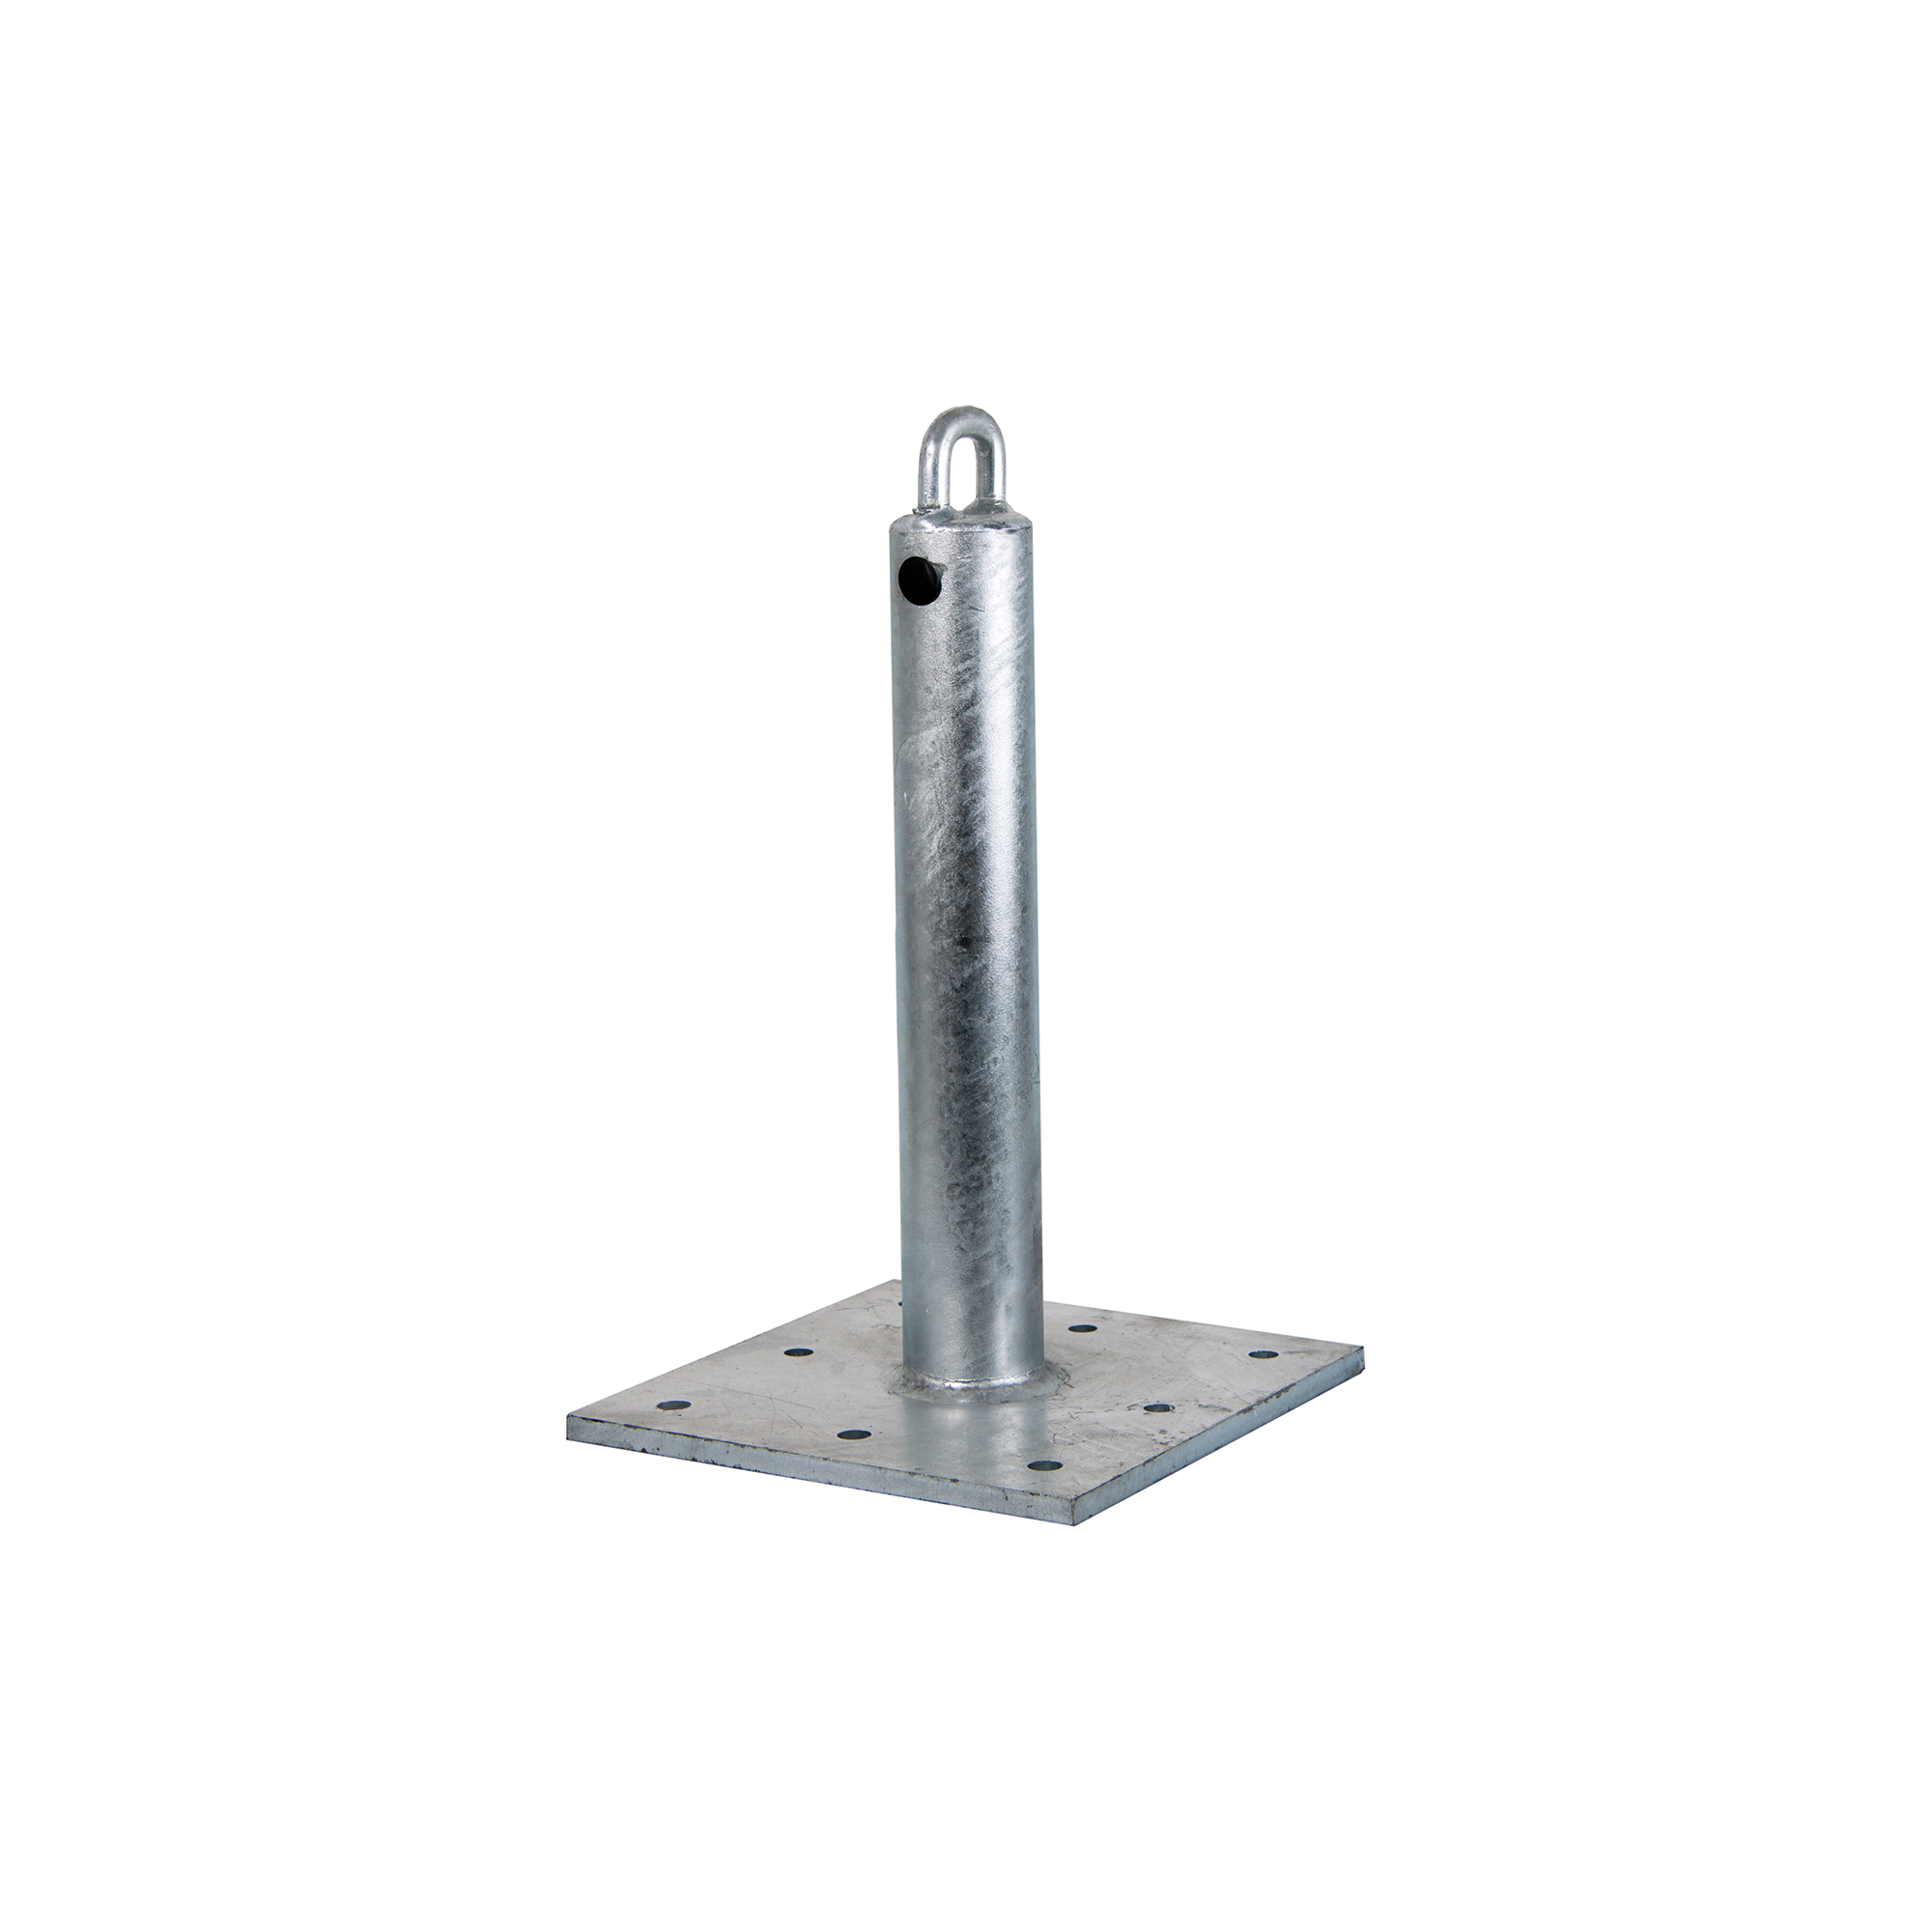 CB-18 Anchor Point: for Concrete